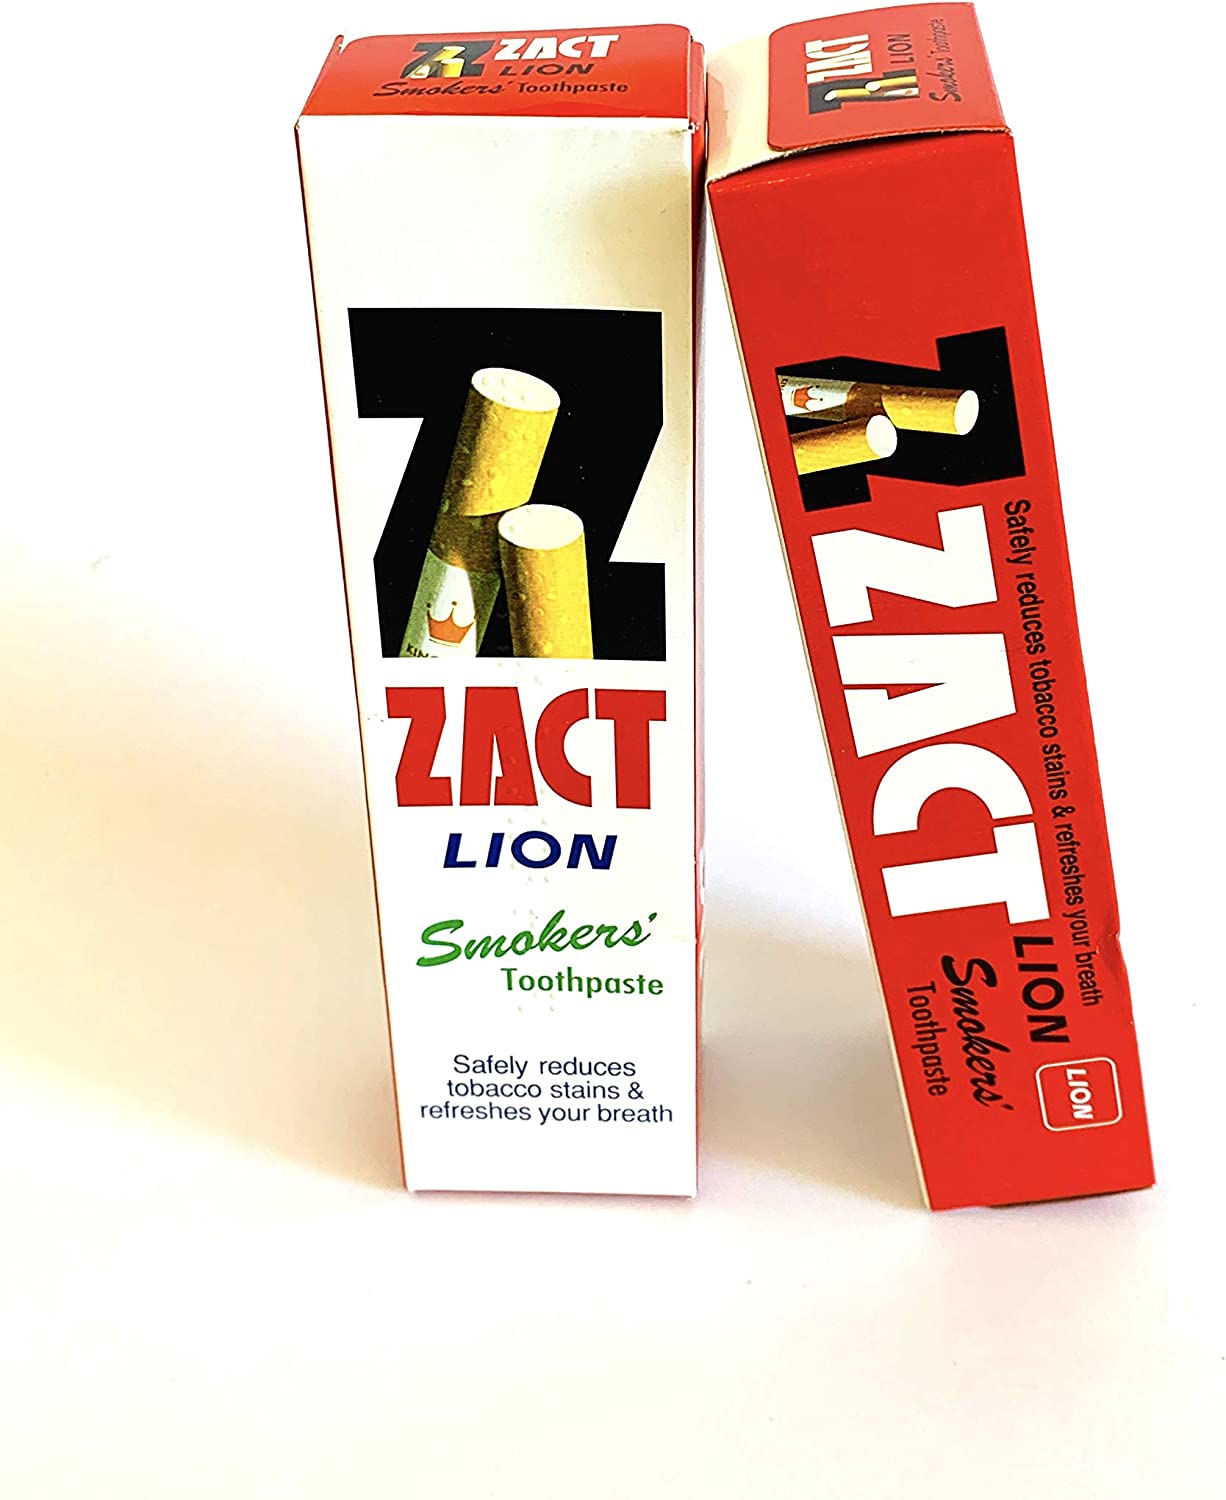 160 G. Zact Lion Toothpaste Smokers'. Advanced Stain Removal Formula  Effectively Removes Tobacco Stains